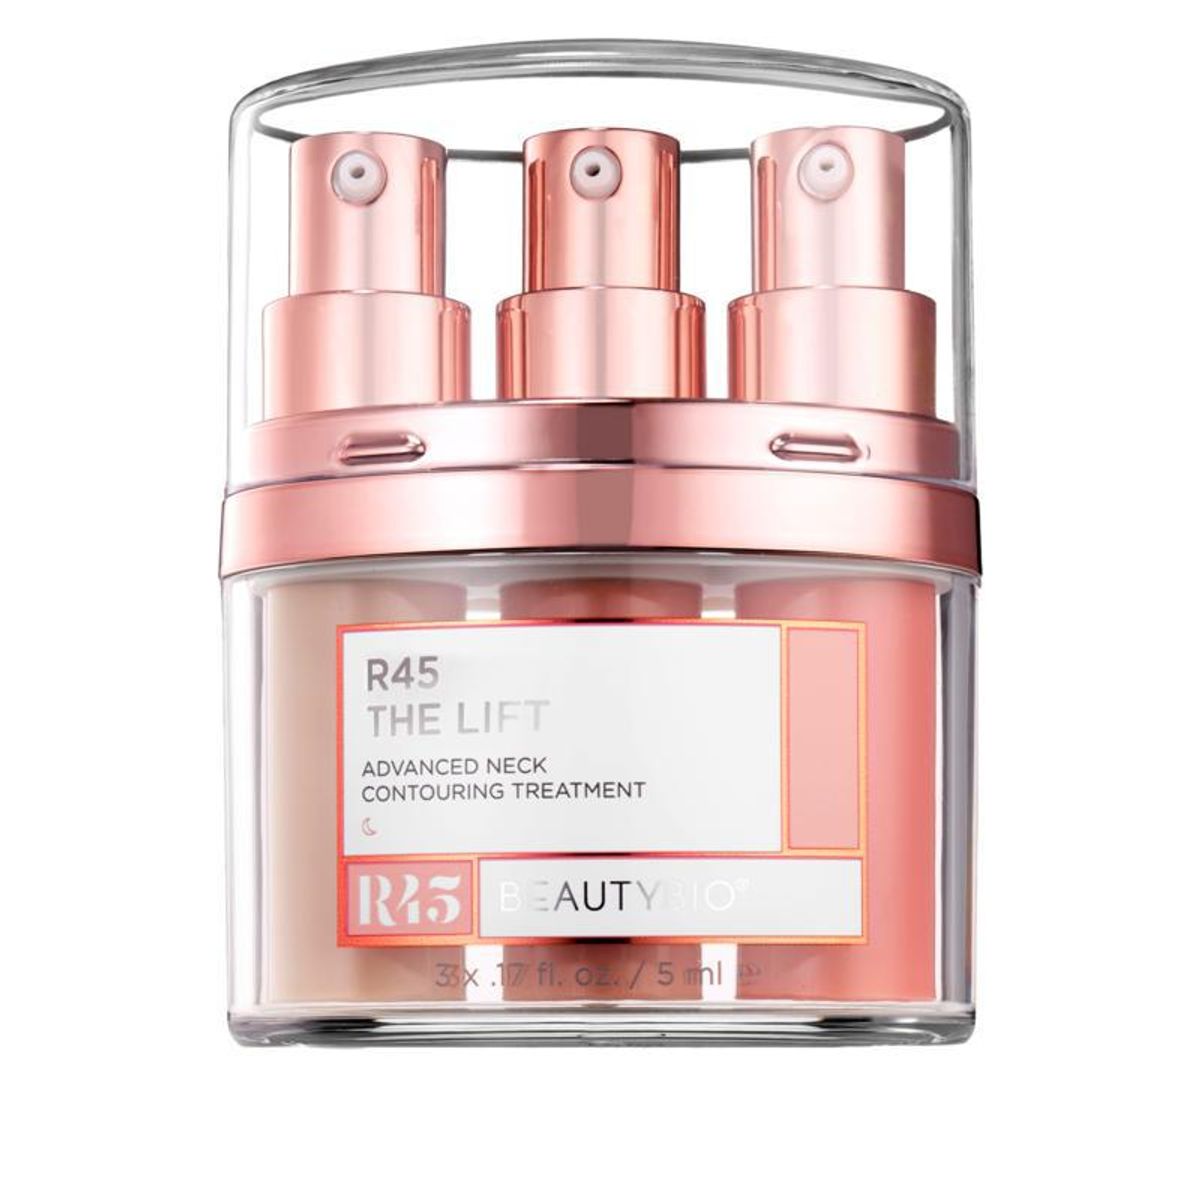 beautybio r45 the lift 3 phase advanced neck contouring treatment